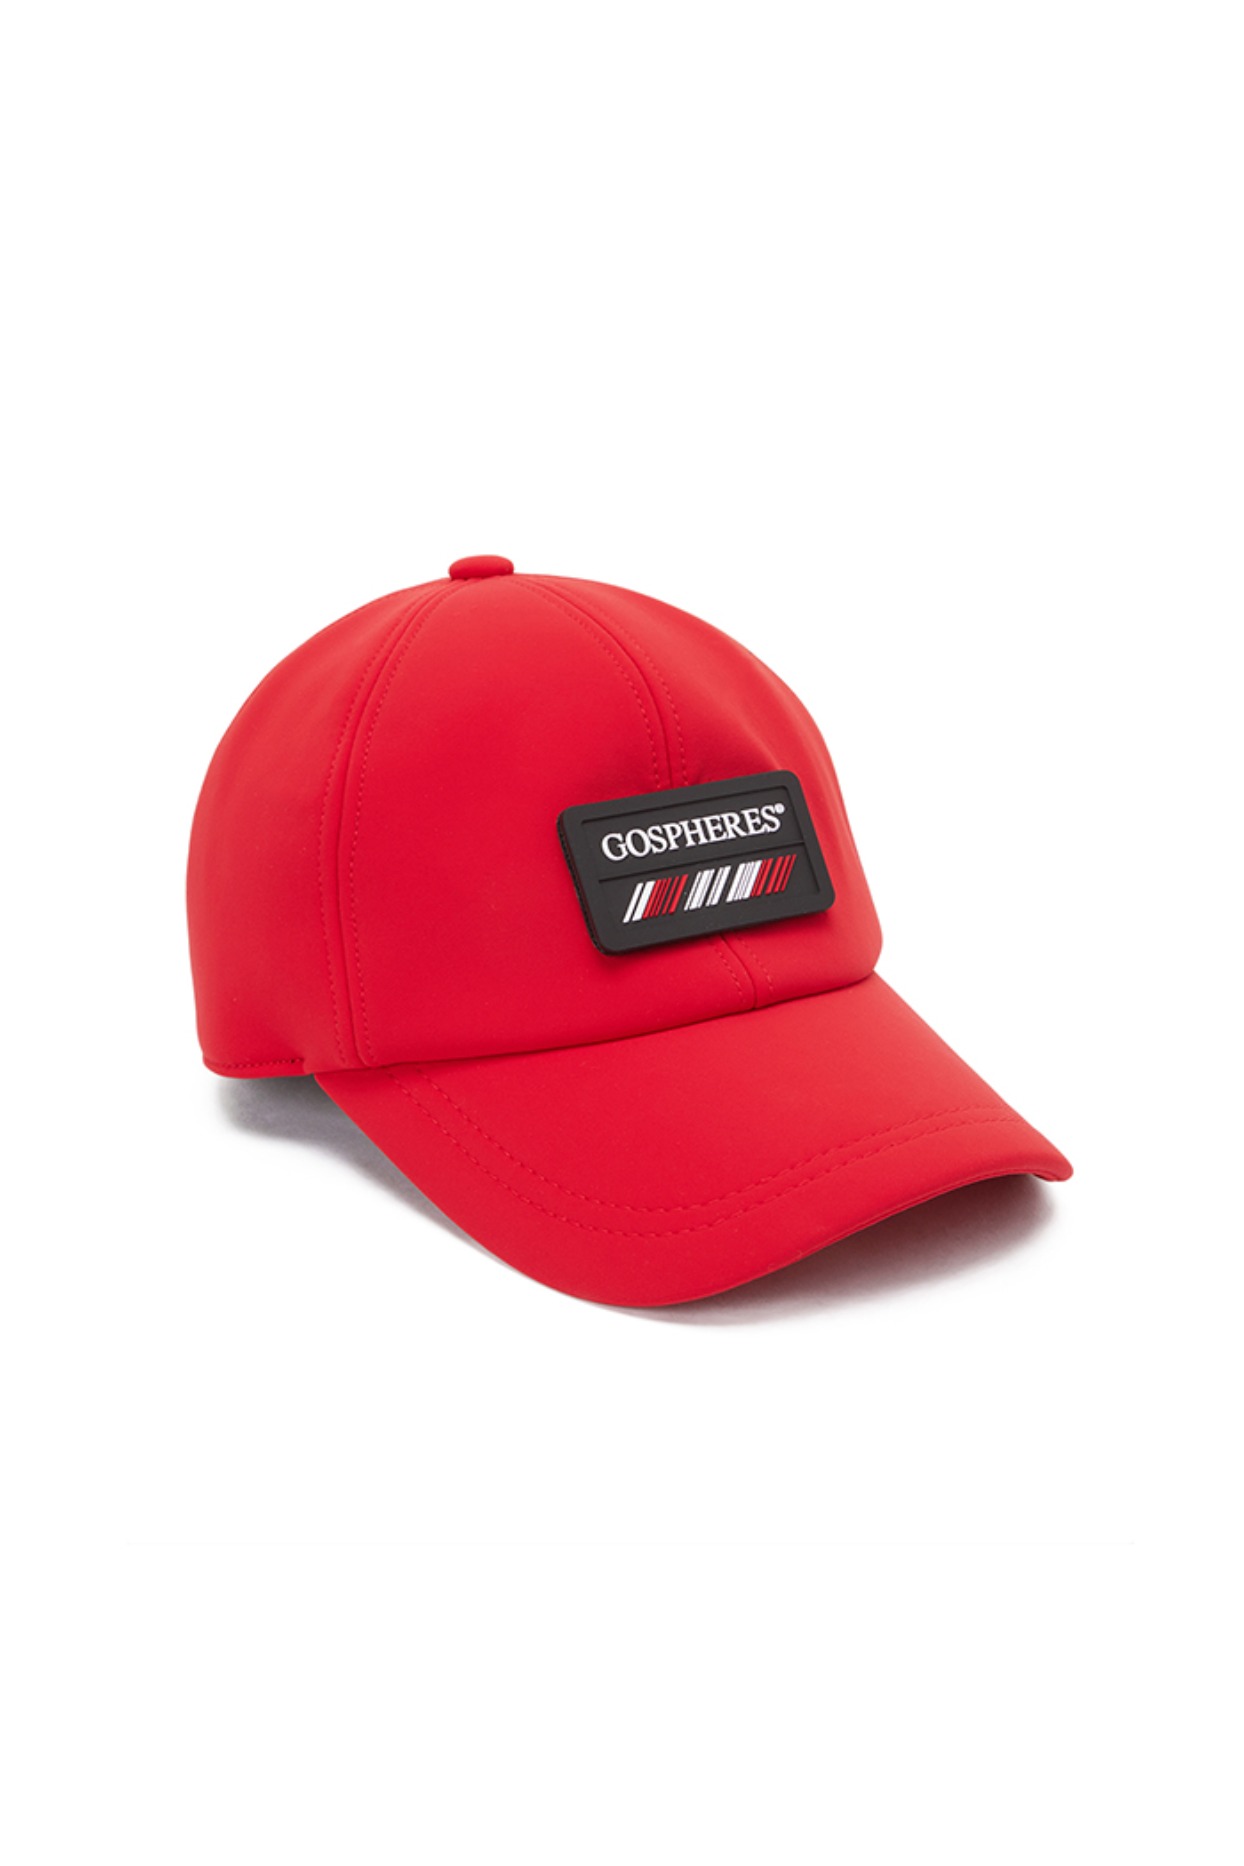 M PERFORMANCE EAR FLAP CAP SPORTING RED